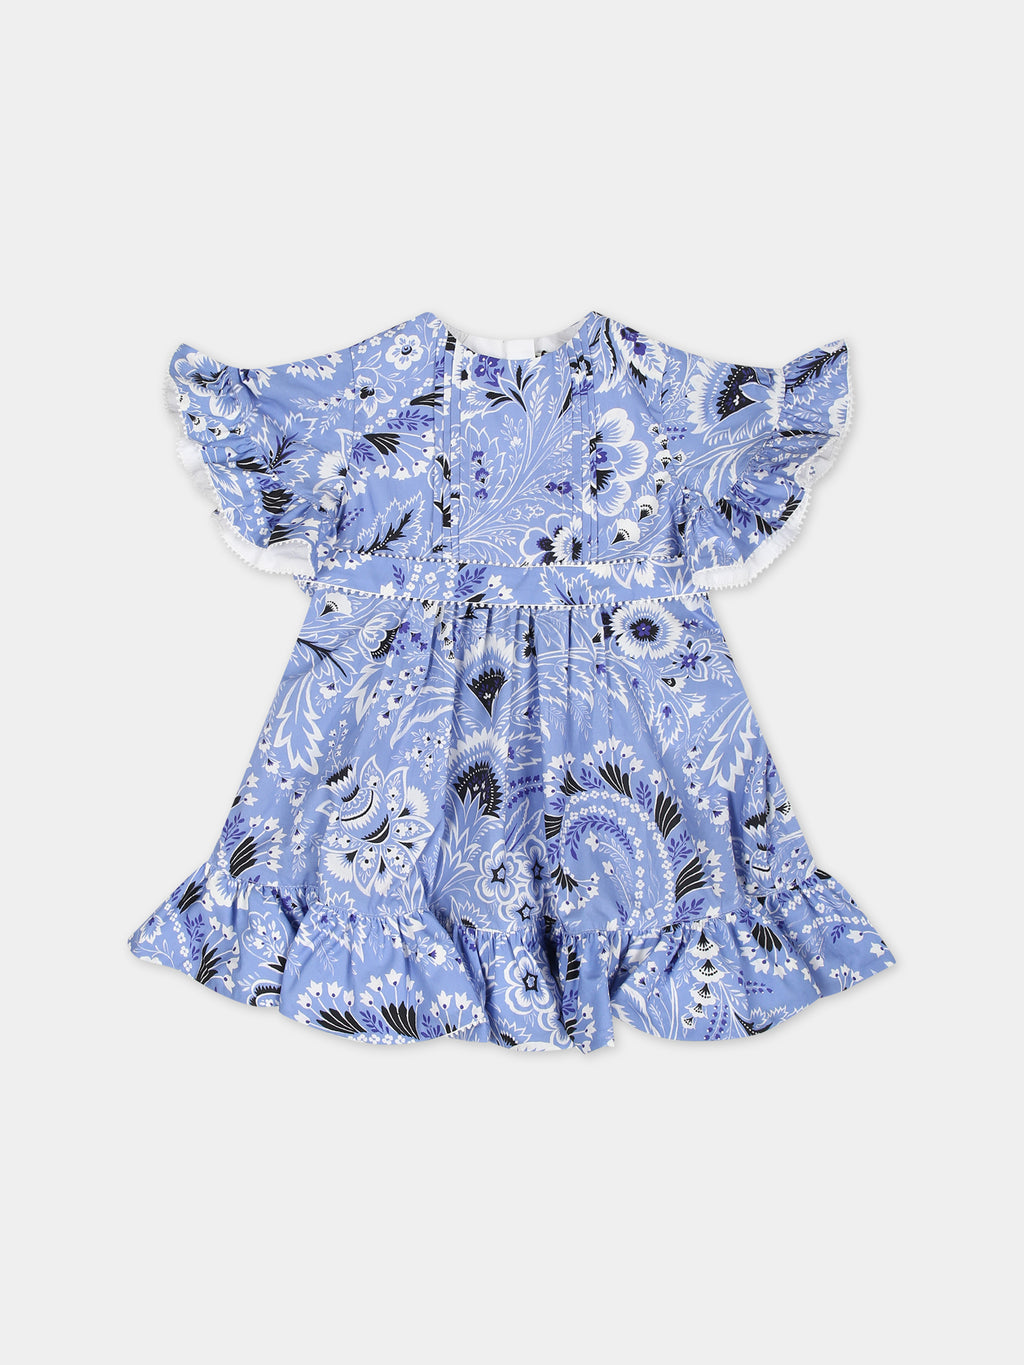 Elegant sky blue dress for baby girl with paisley pattern